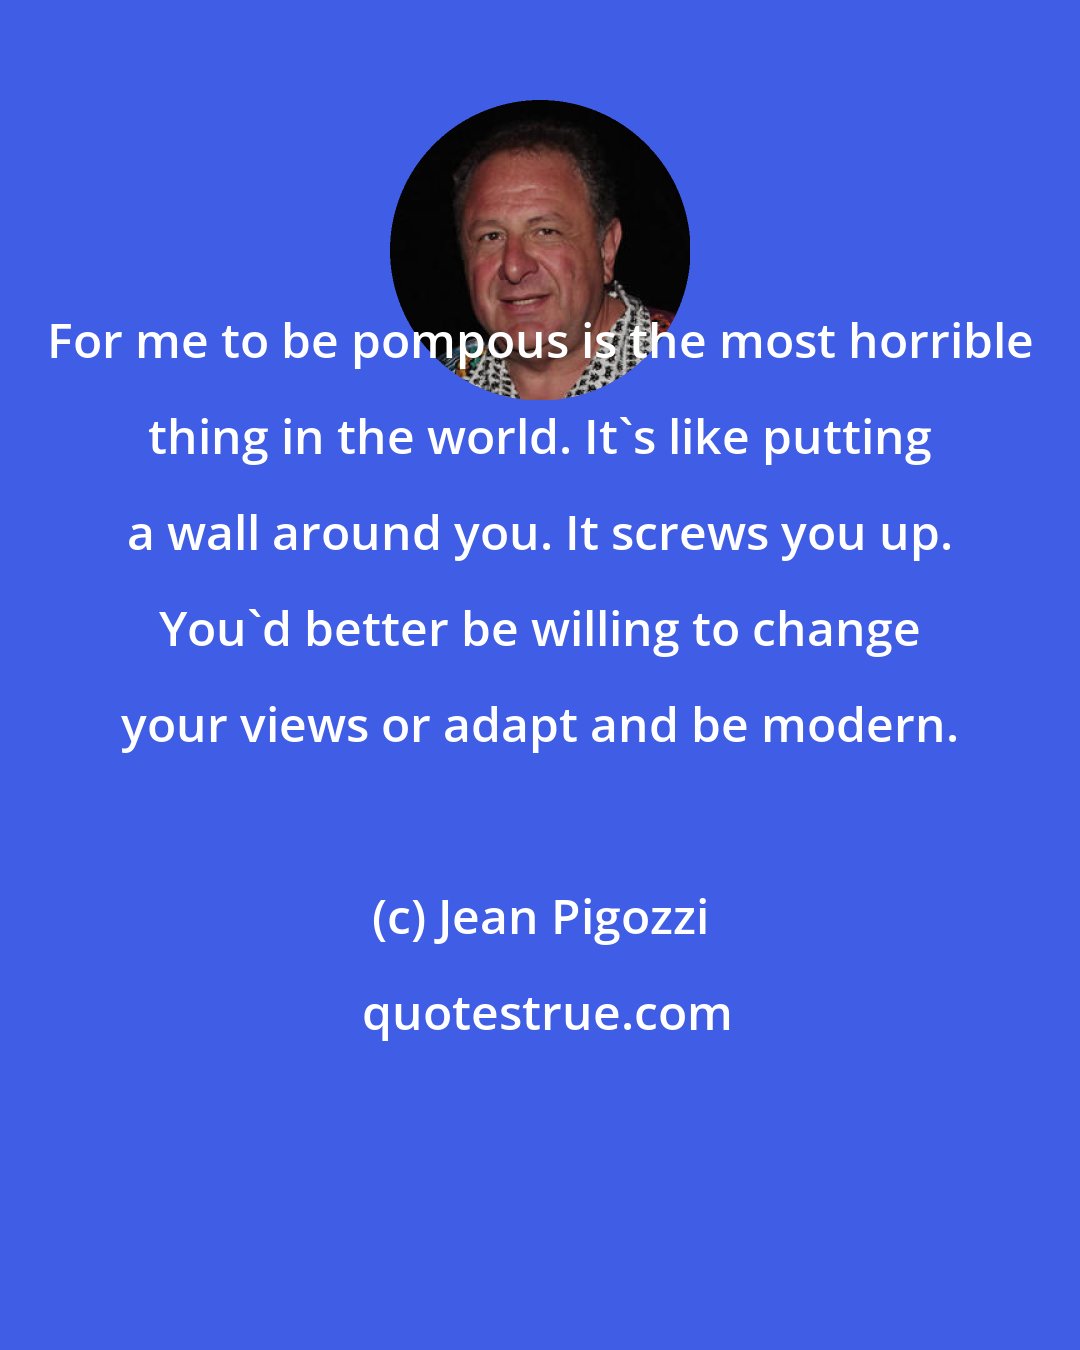 Jean Pigozzi: For me to be pompous is the most horrible thing in the world. It's like putting a wall around you. It screws you up. You'd better be willing to change your views or adapt and be modern.